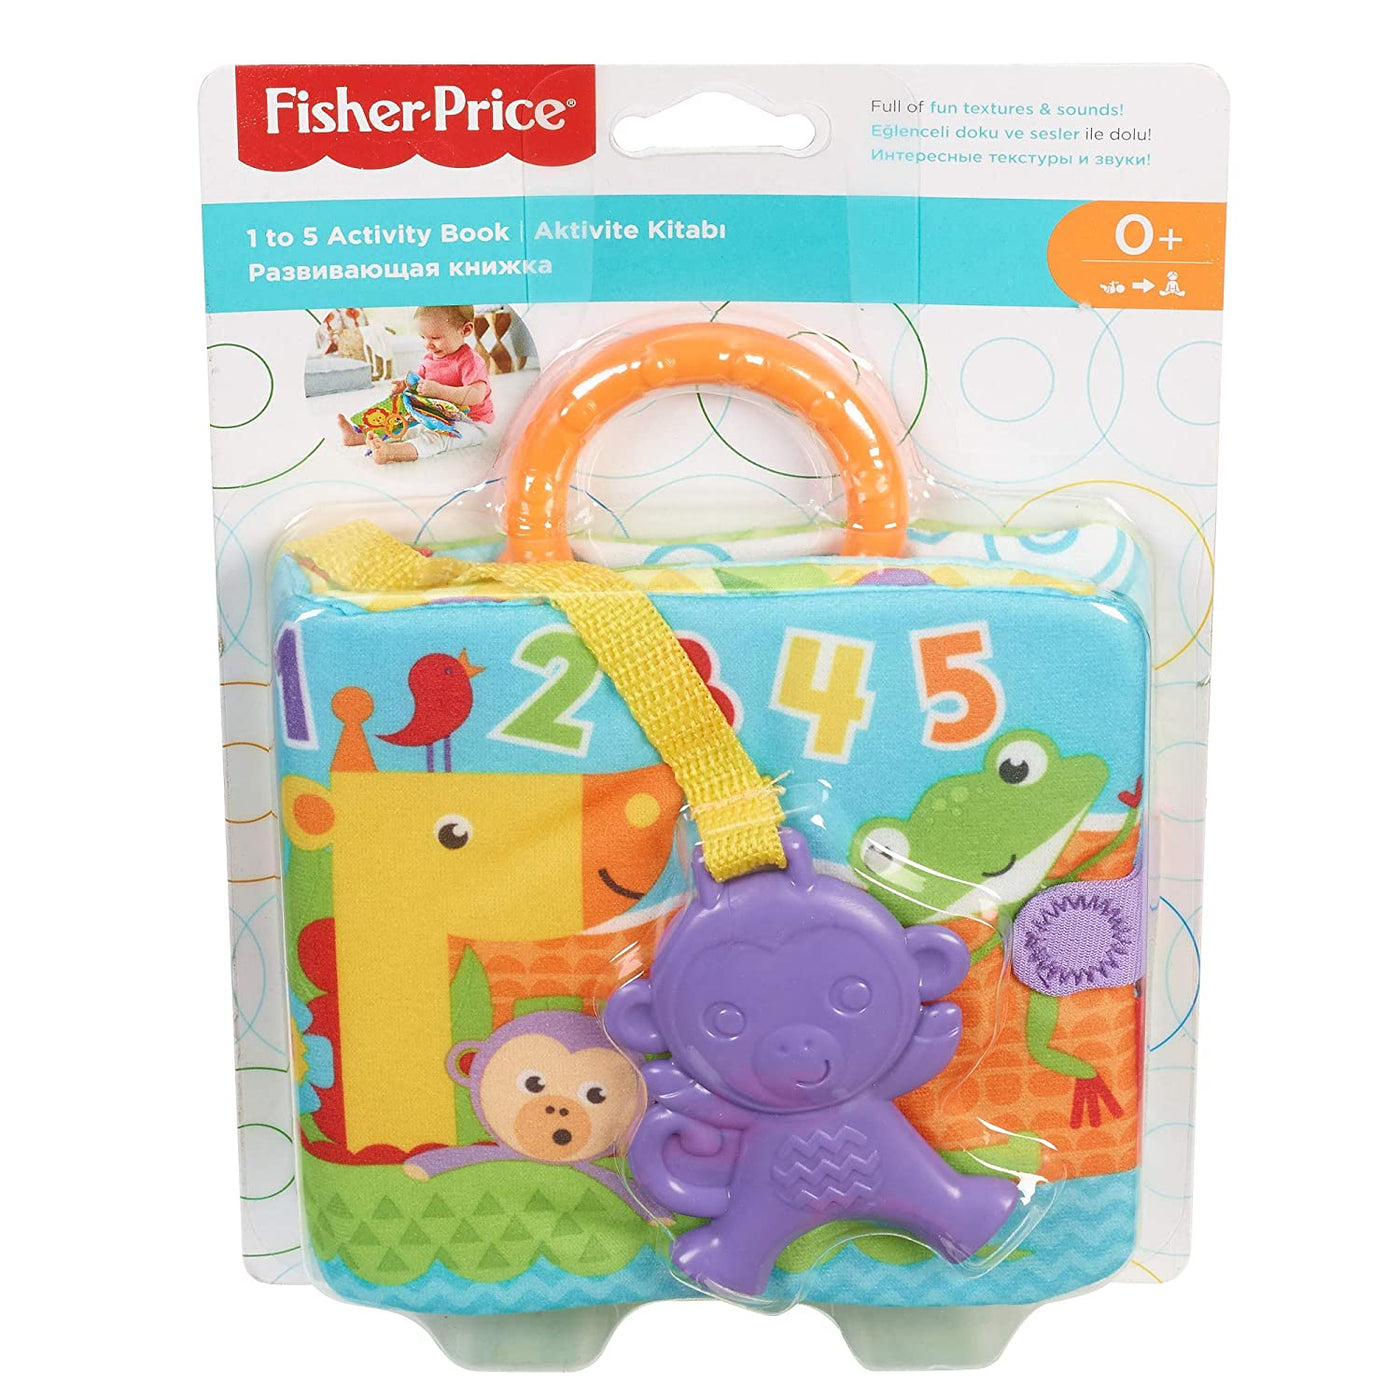 1-to-5 Activity Book | Fisher-Price